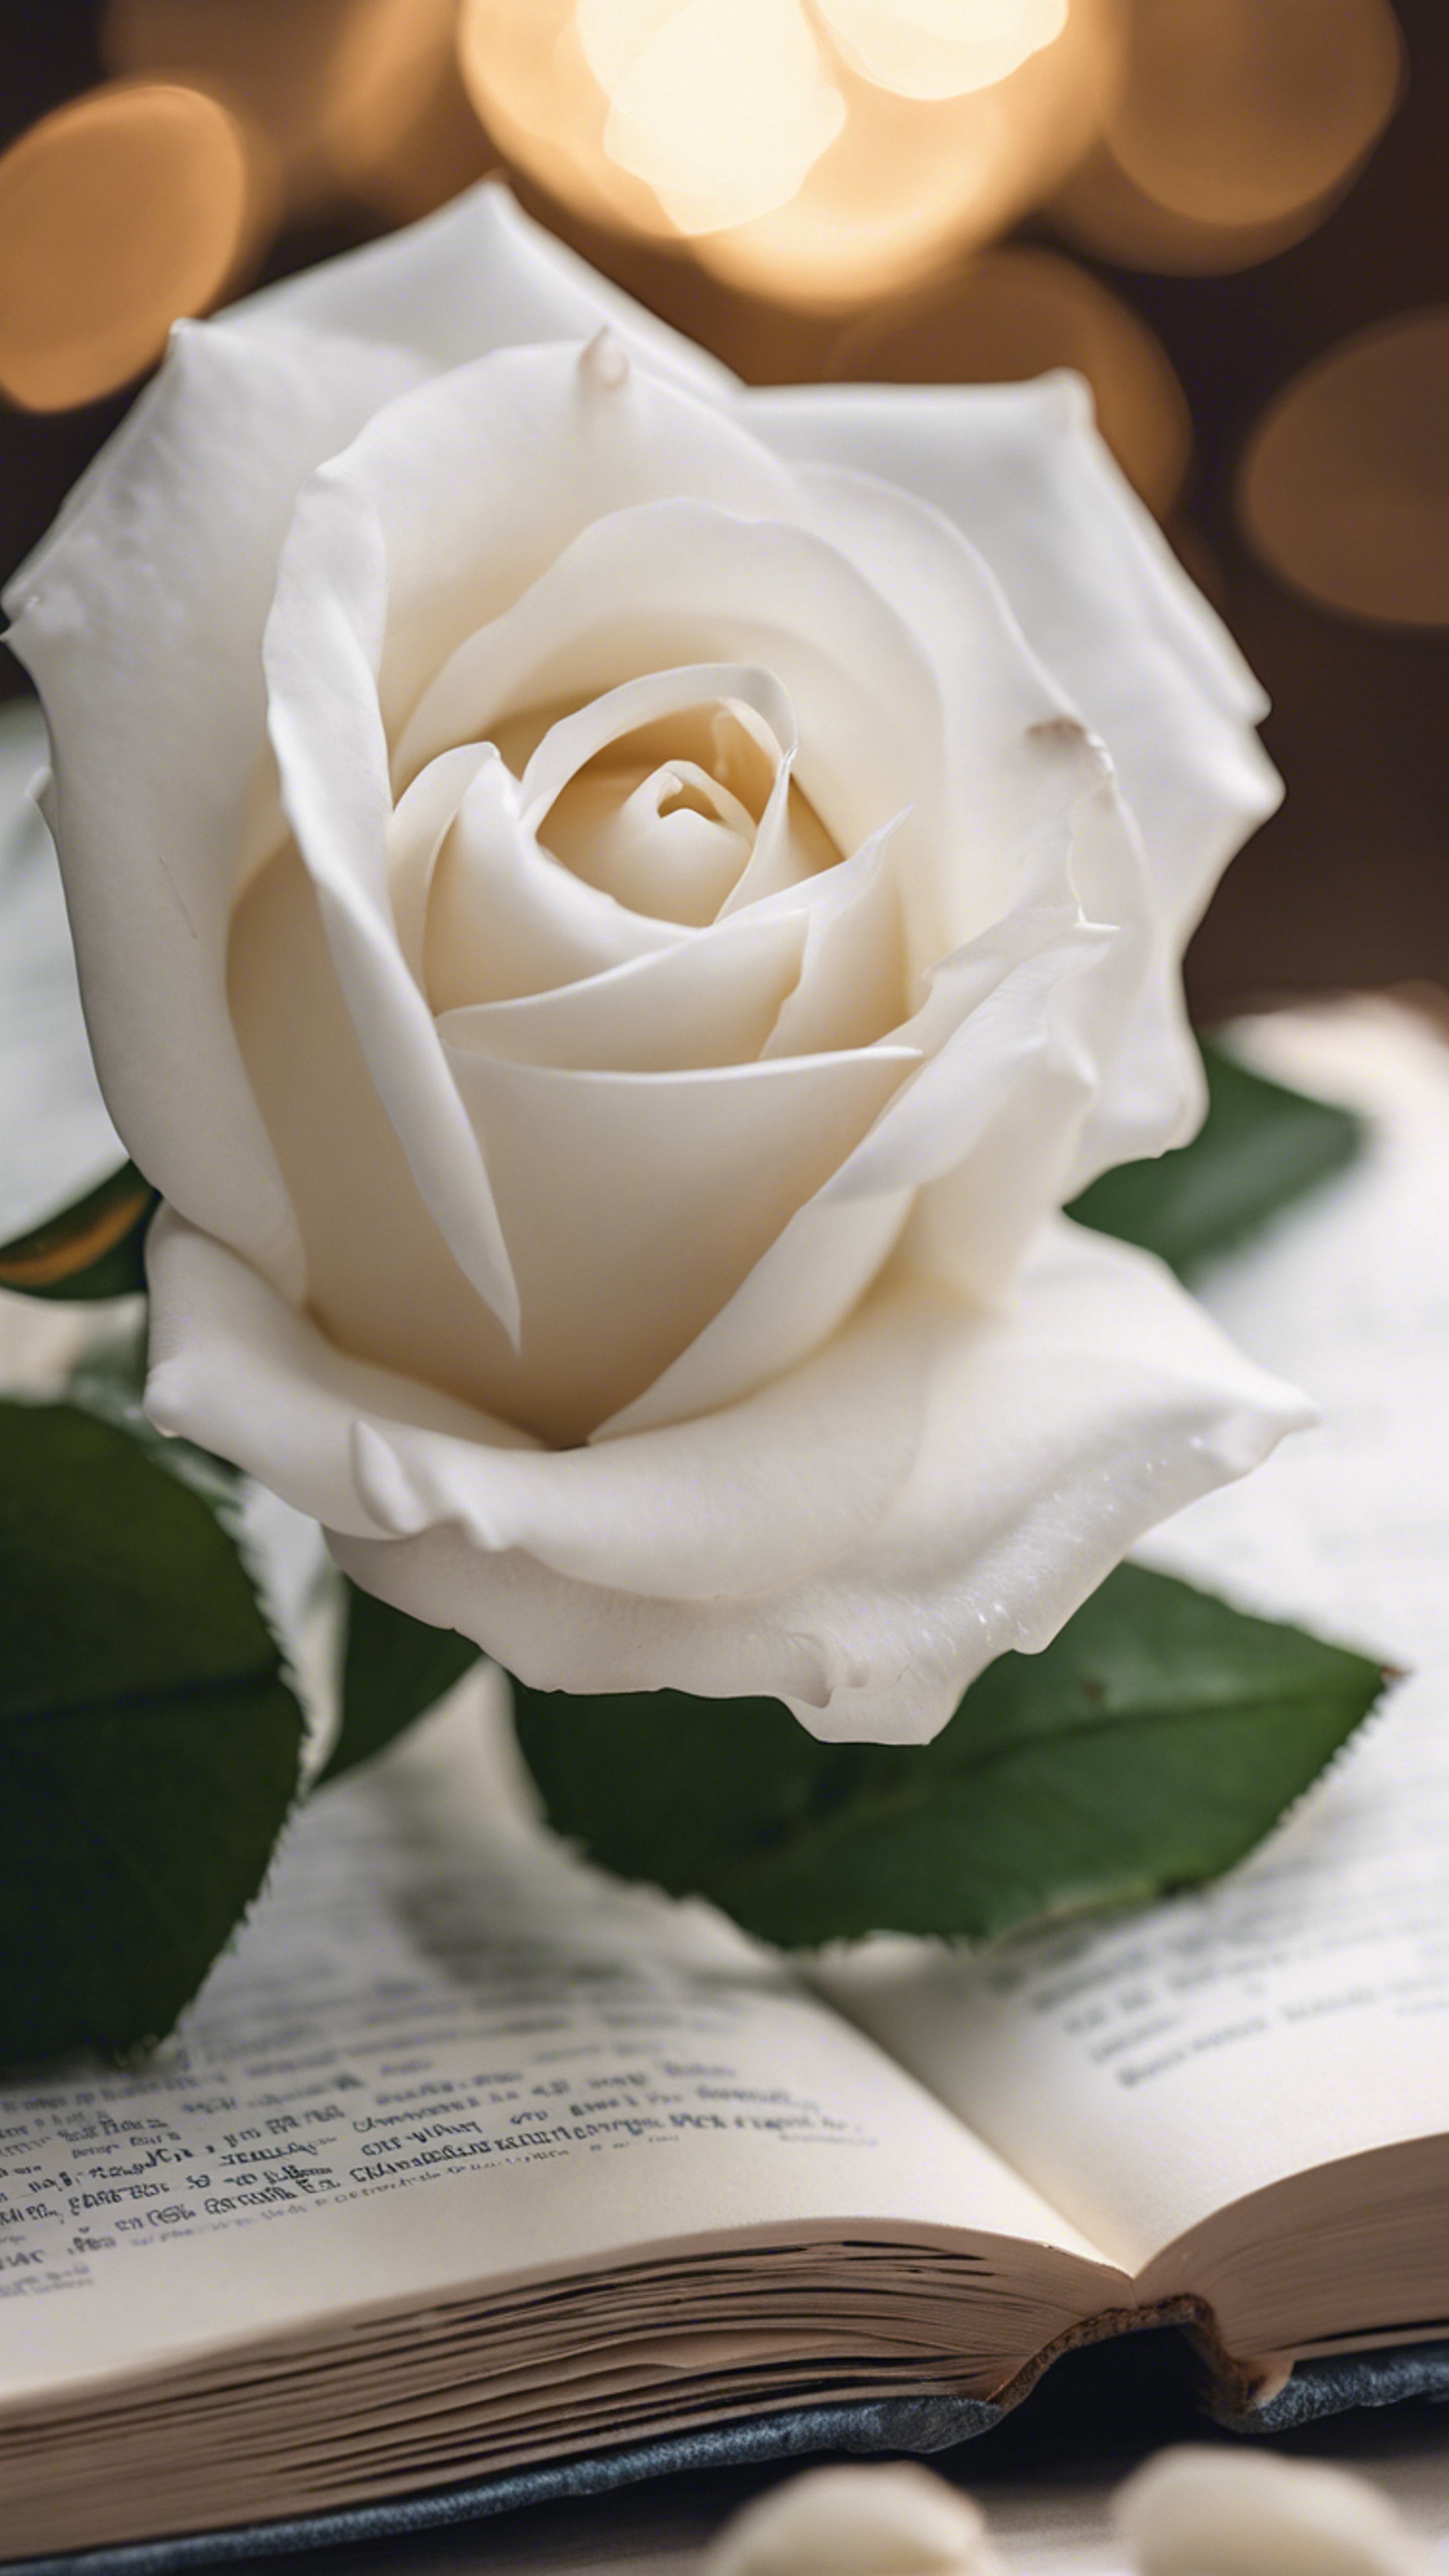 A serene white rose perched on an open hardcover book. Tapet[5eeaaa5d95634df1b3fb]